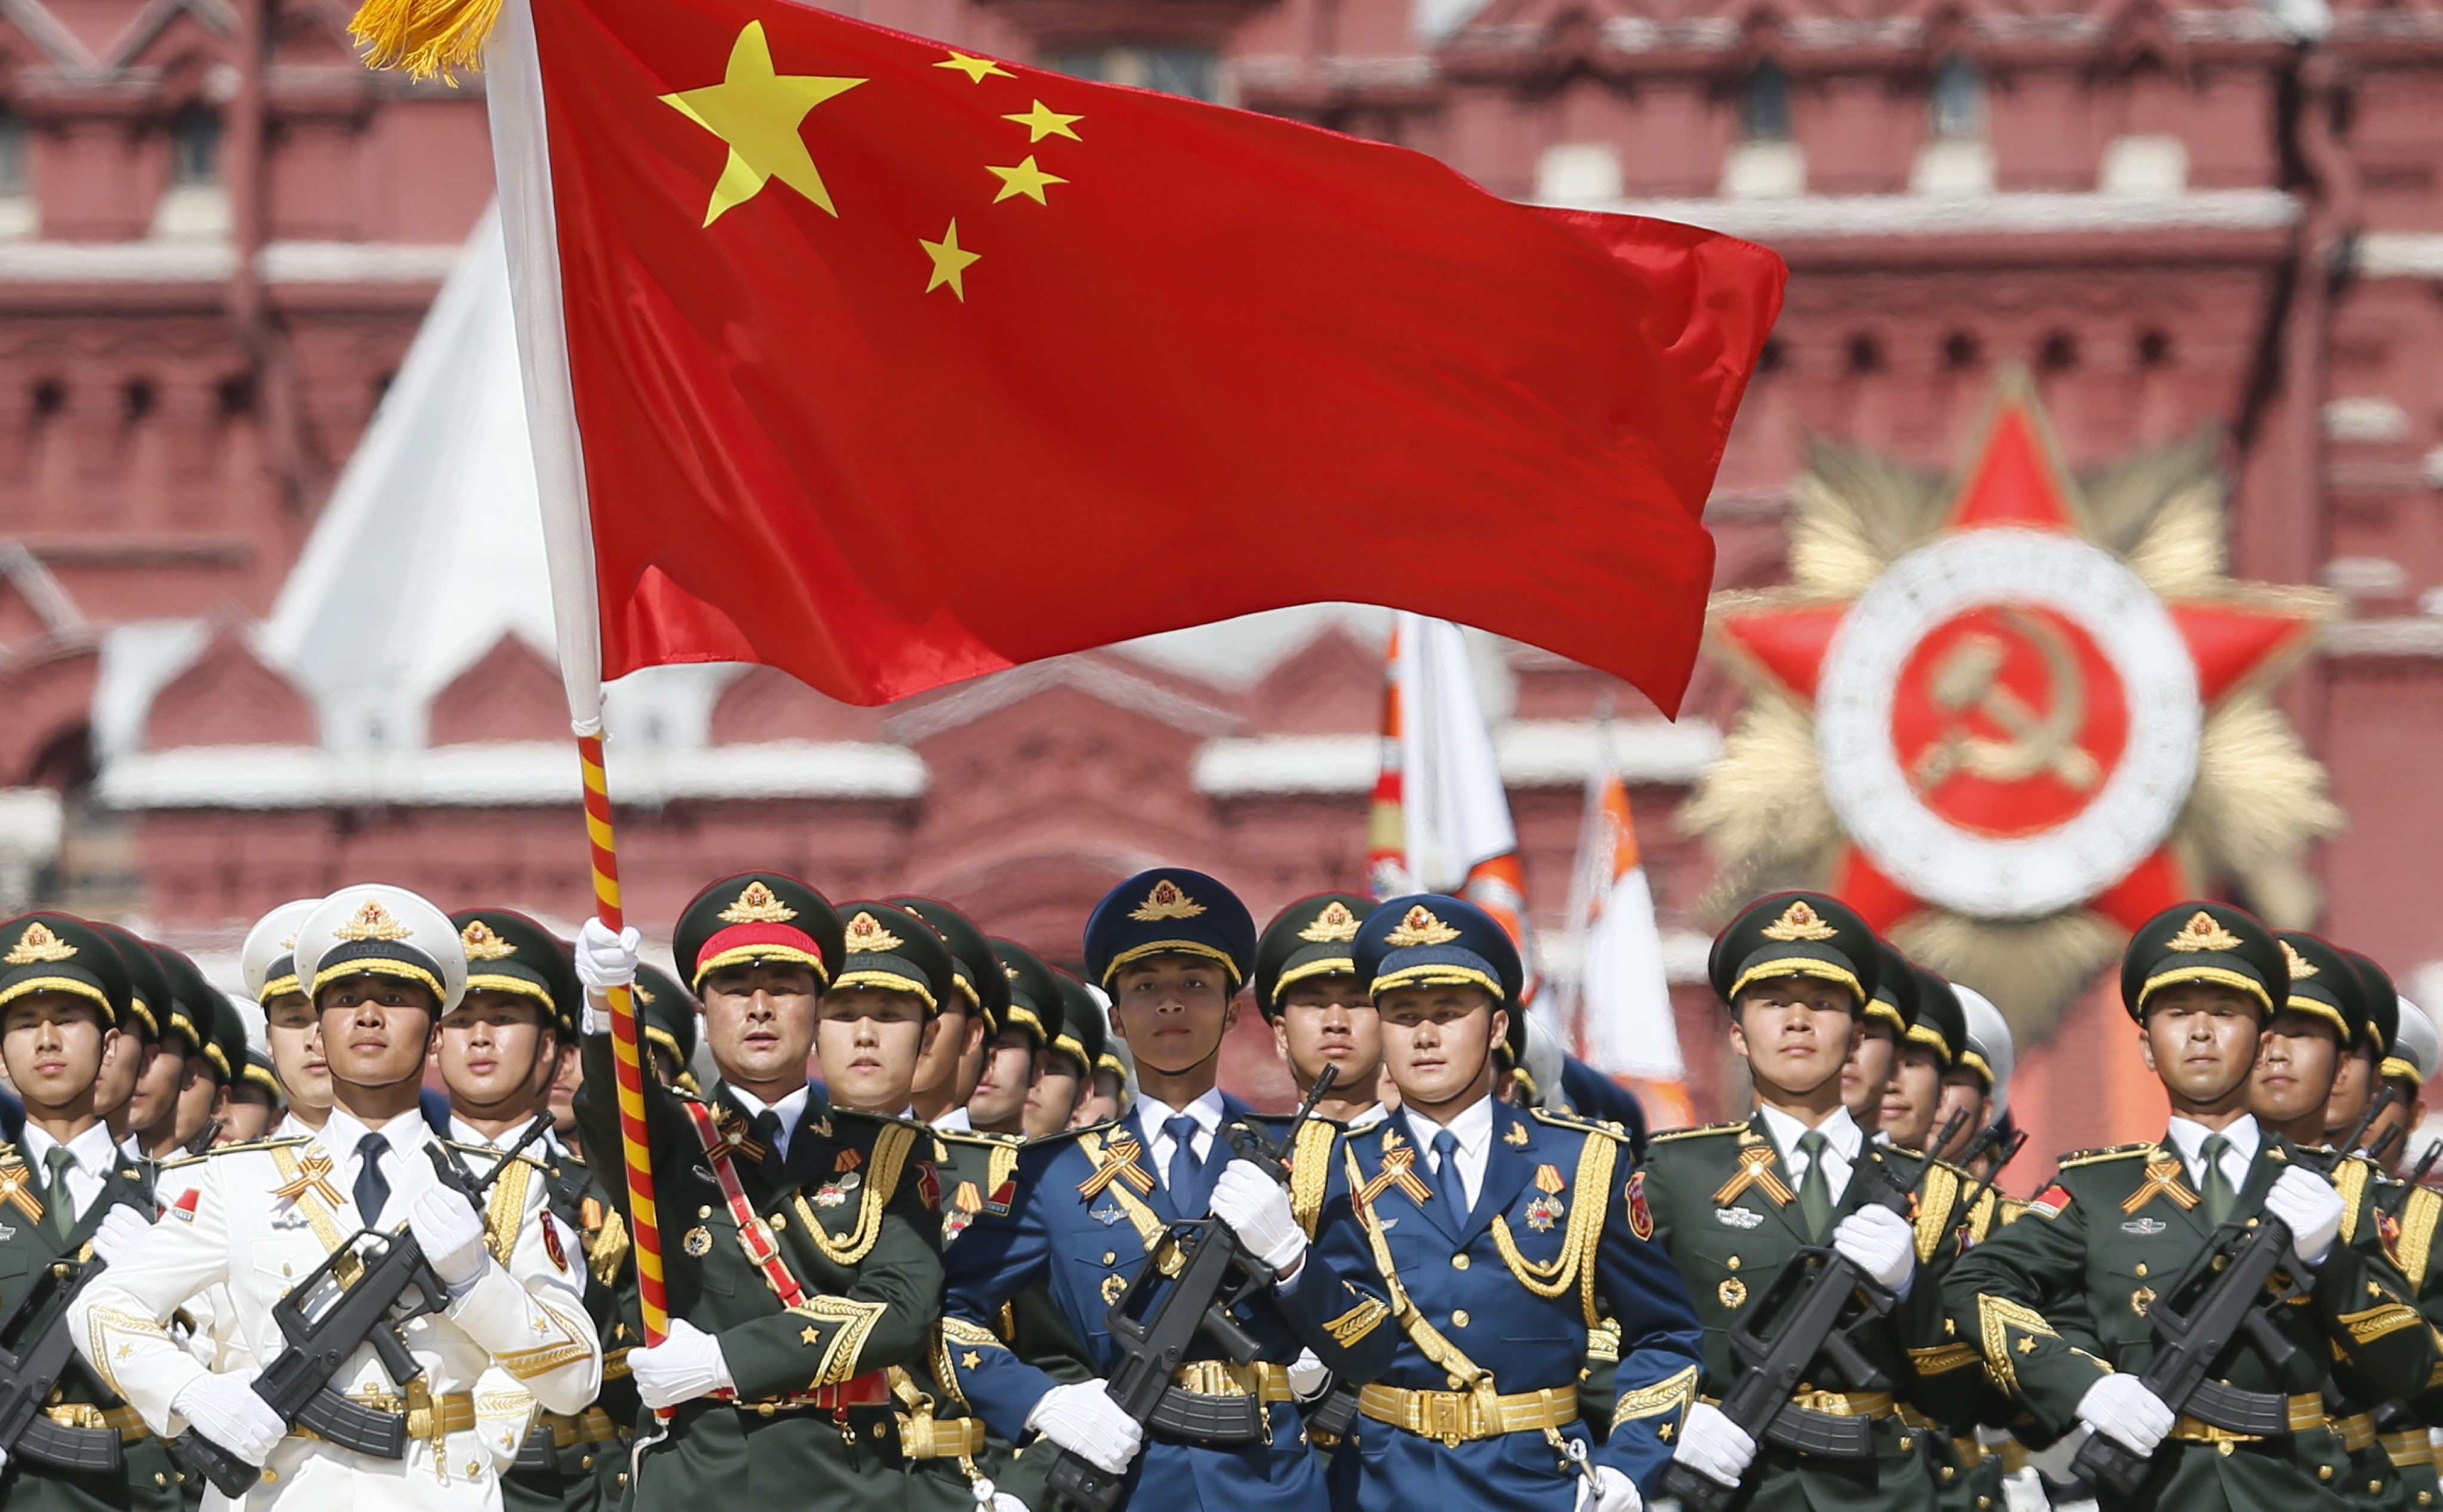 Chinese servicemen march in the Russian Victory Day military parade in Moscow’s Red Square, in May 2015. Photo: EPA